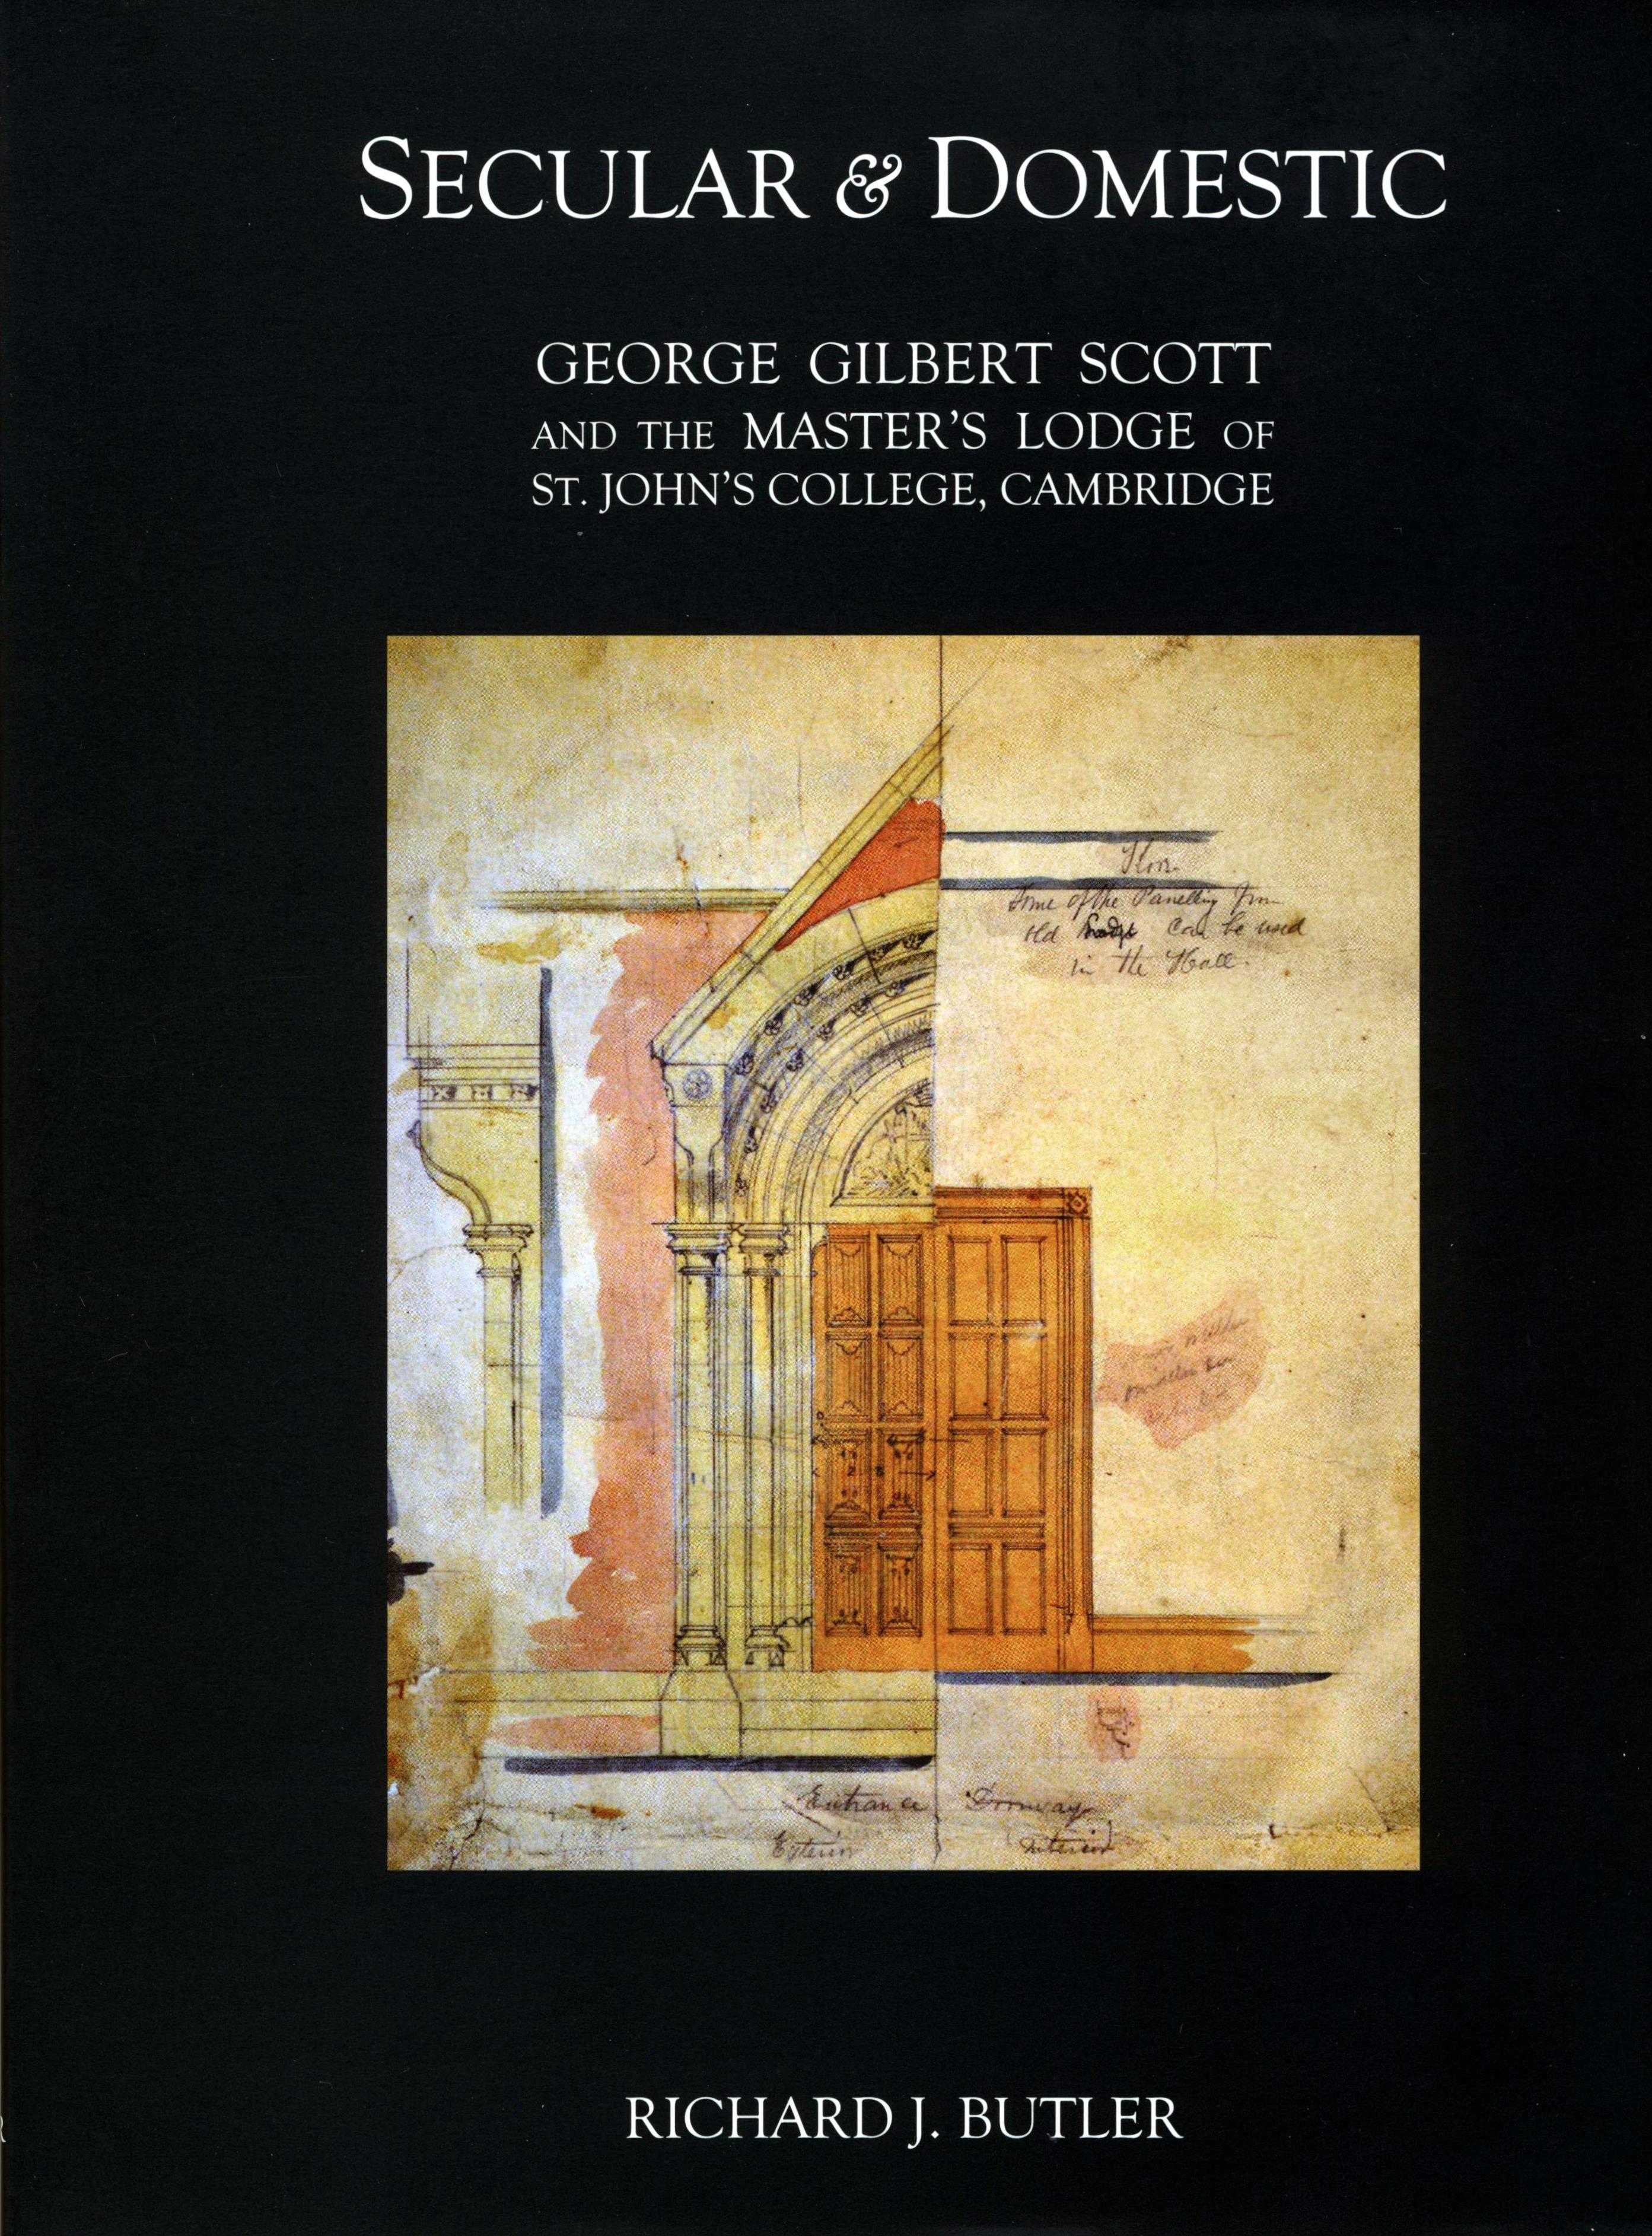 'Secular & Domestic: George Gilbert Scott and the Master's Lodge of St John's College, Cambridge': a new book written by graduate student Richard Butler